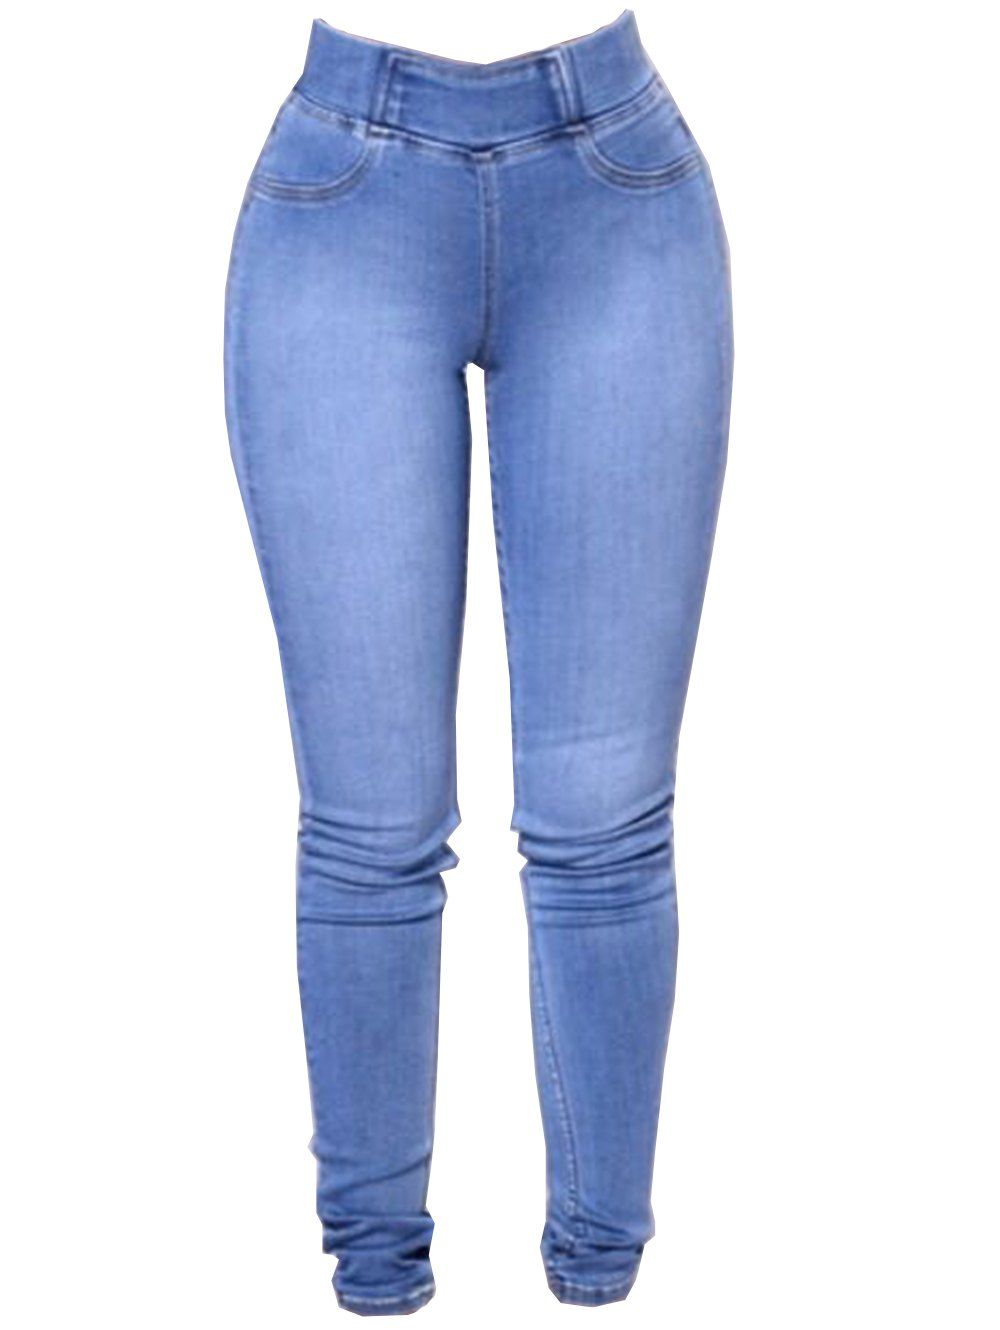 Affordable Womens Fashion Slim Fit Stretchy Skinny Jeans  